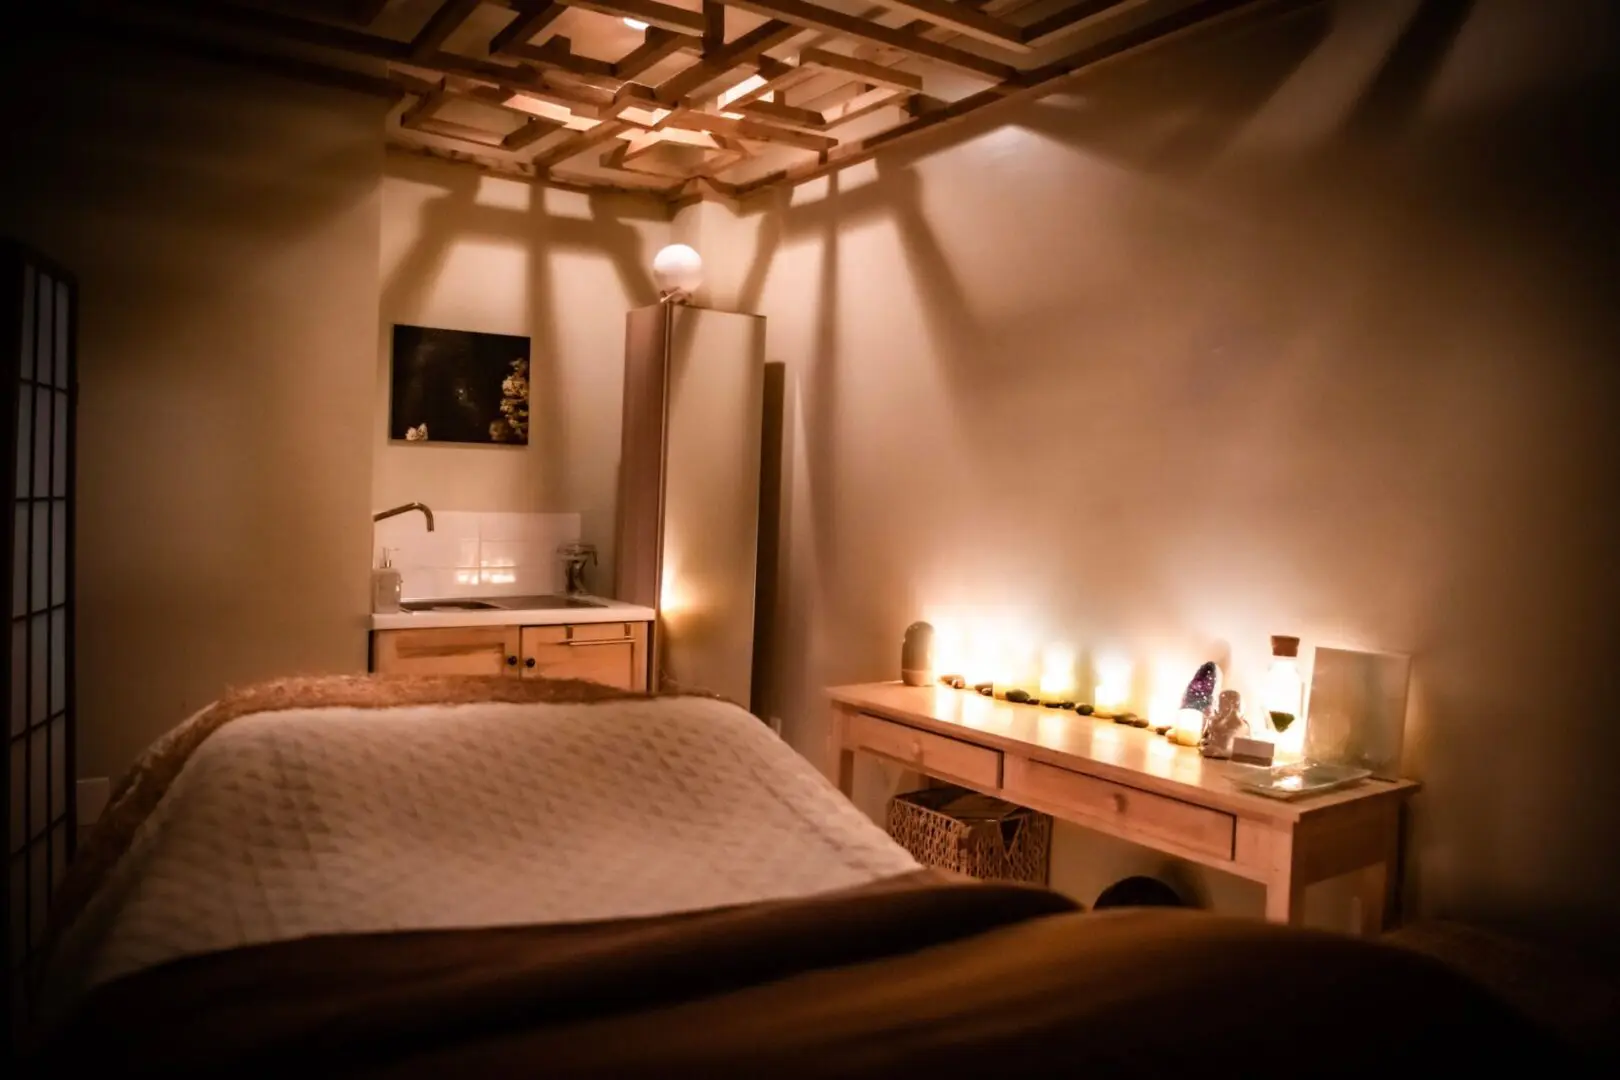 A bed room with candles lit in the corner